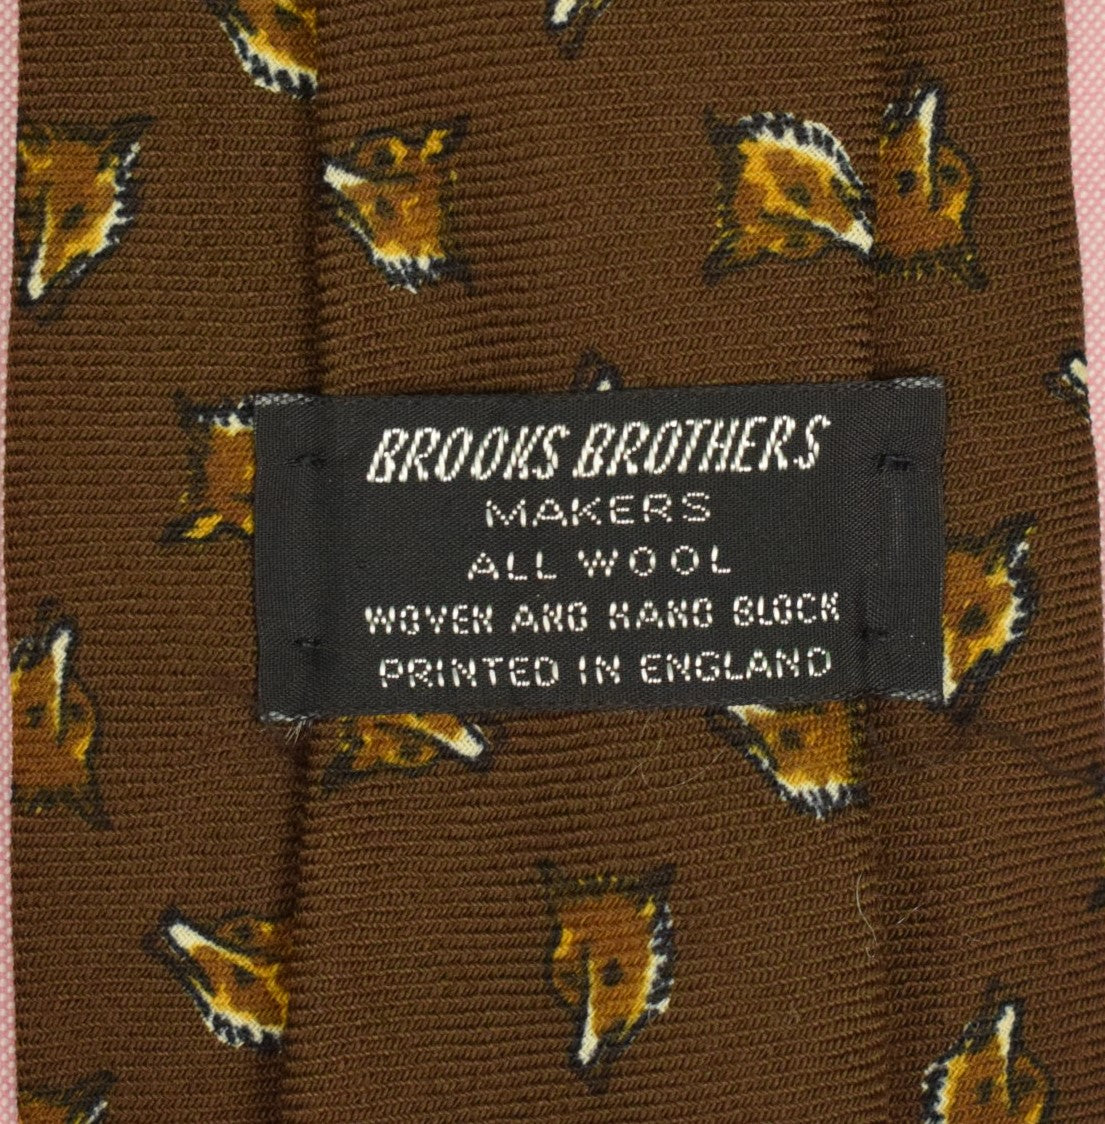 "Brooks Brothers Challis Fox Mask Brown Tie Printed in England" (SOLD)